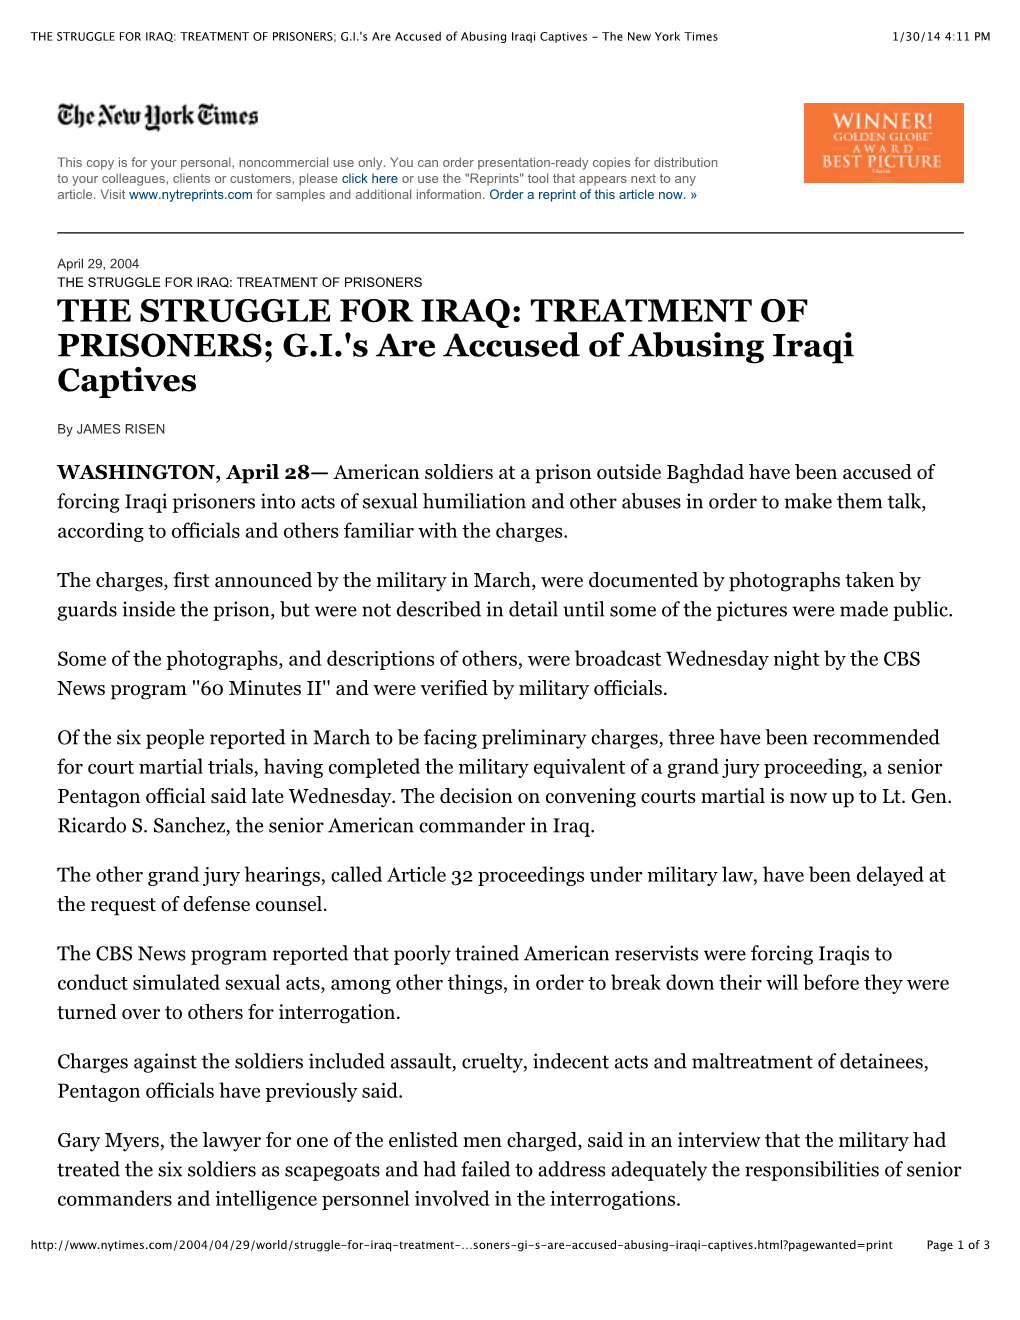 THE STRUGGLE for IRAQ: TREATMENT of PRISONERS; GI's Are Accused of Abusing Iraqi Captives